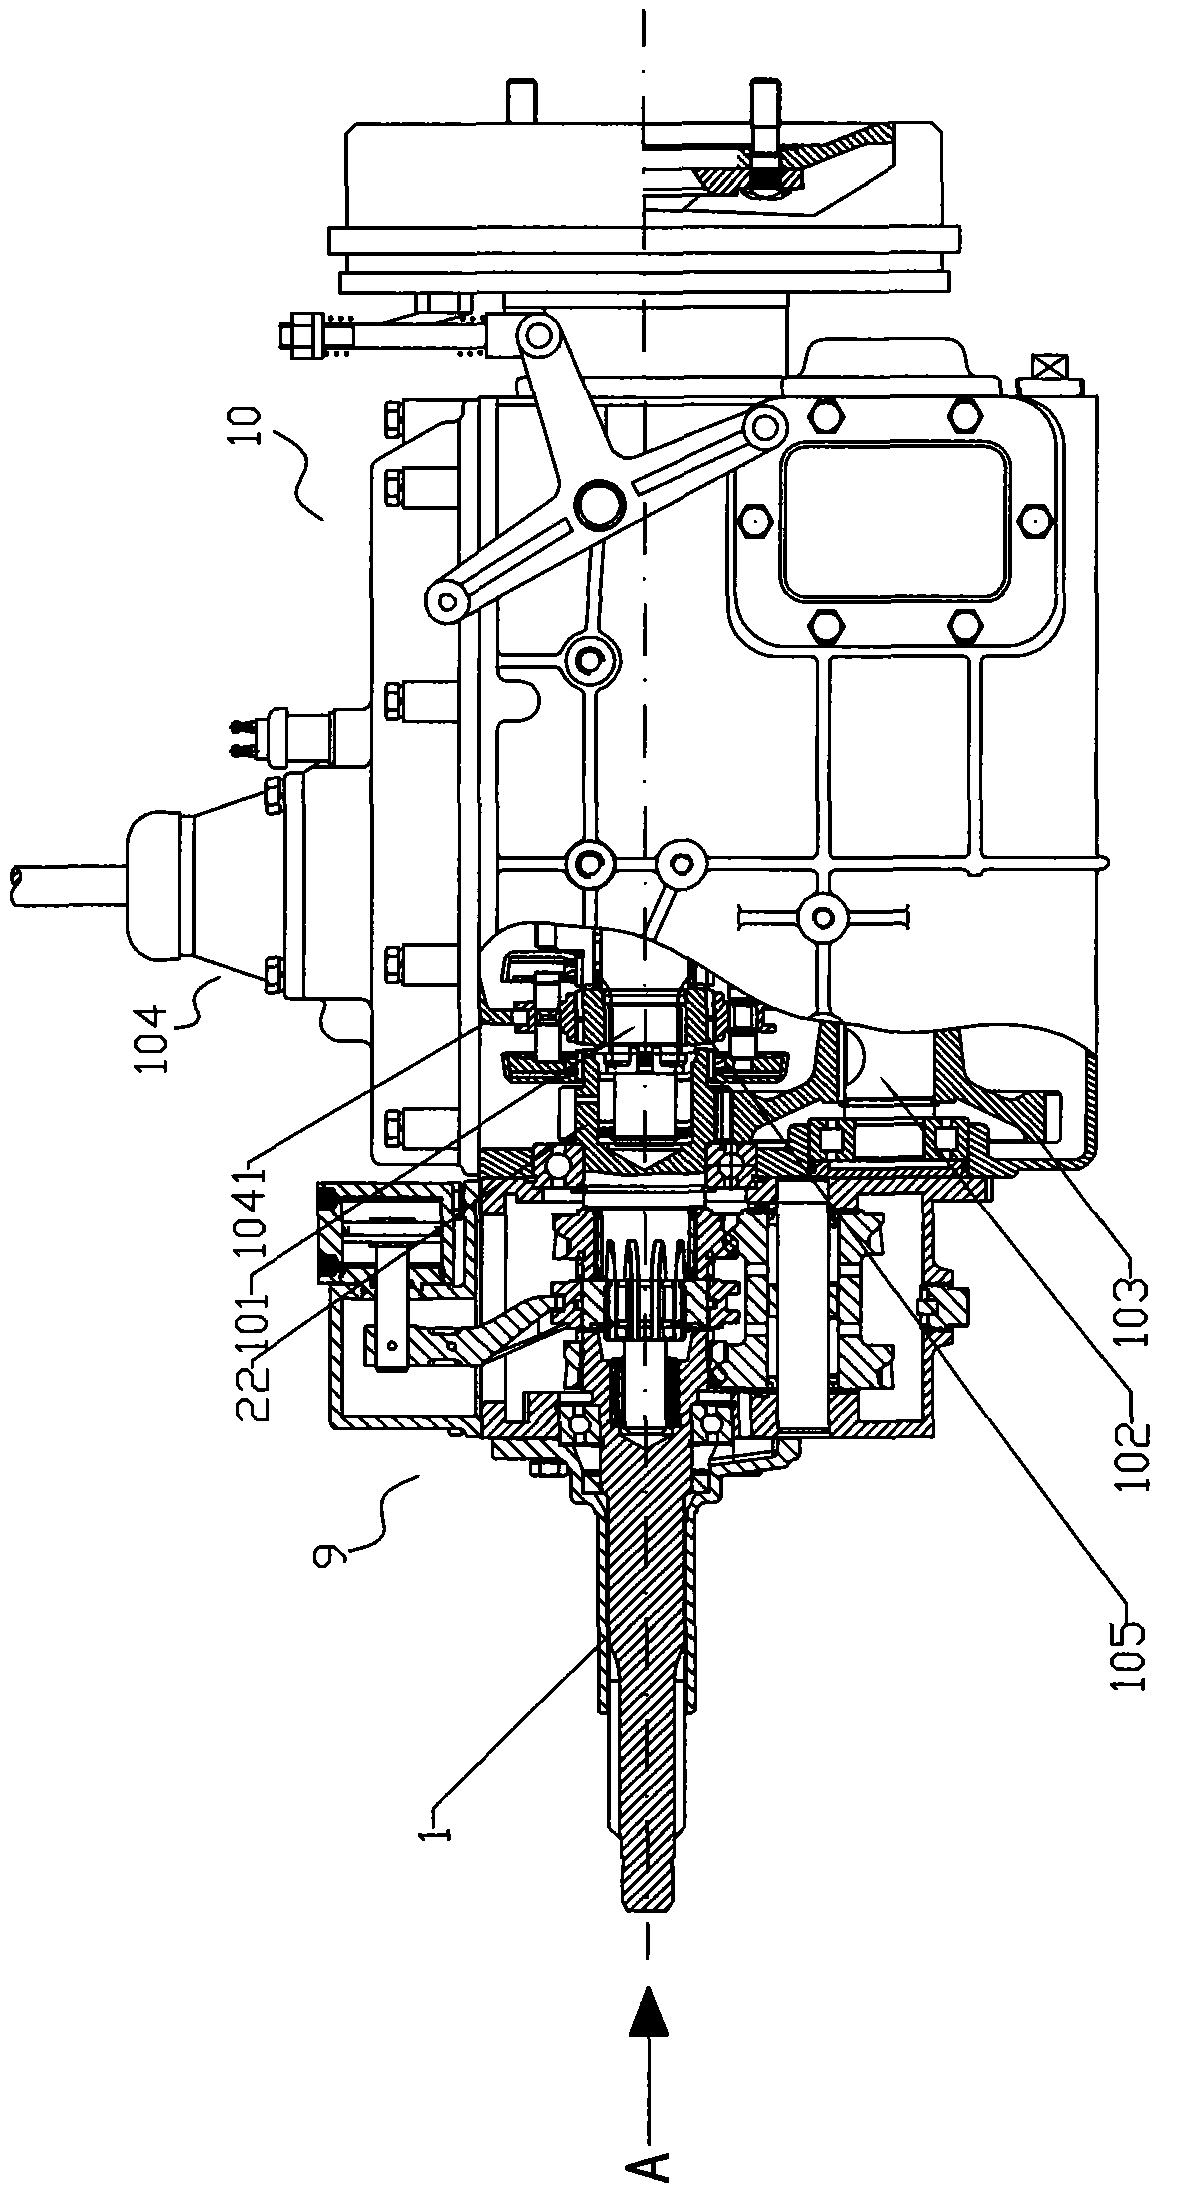 Multi-gear combined type transmission with prepositioned auxiliary box